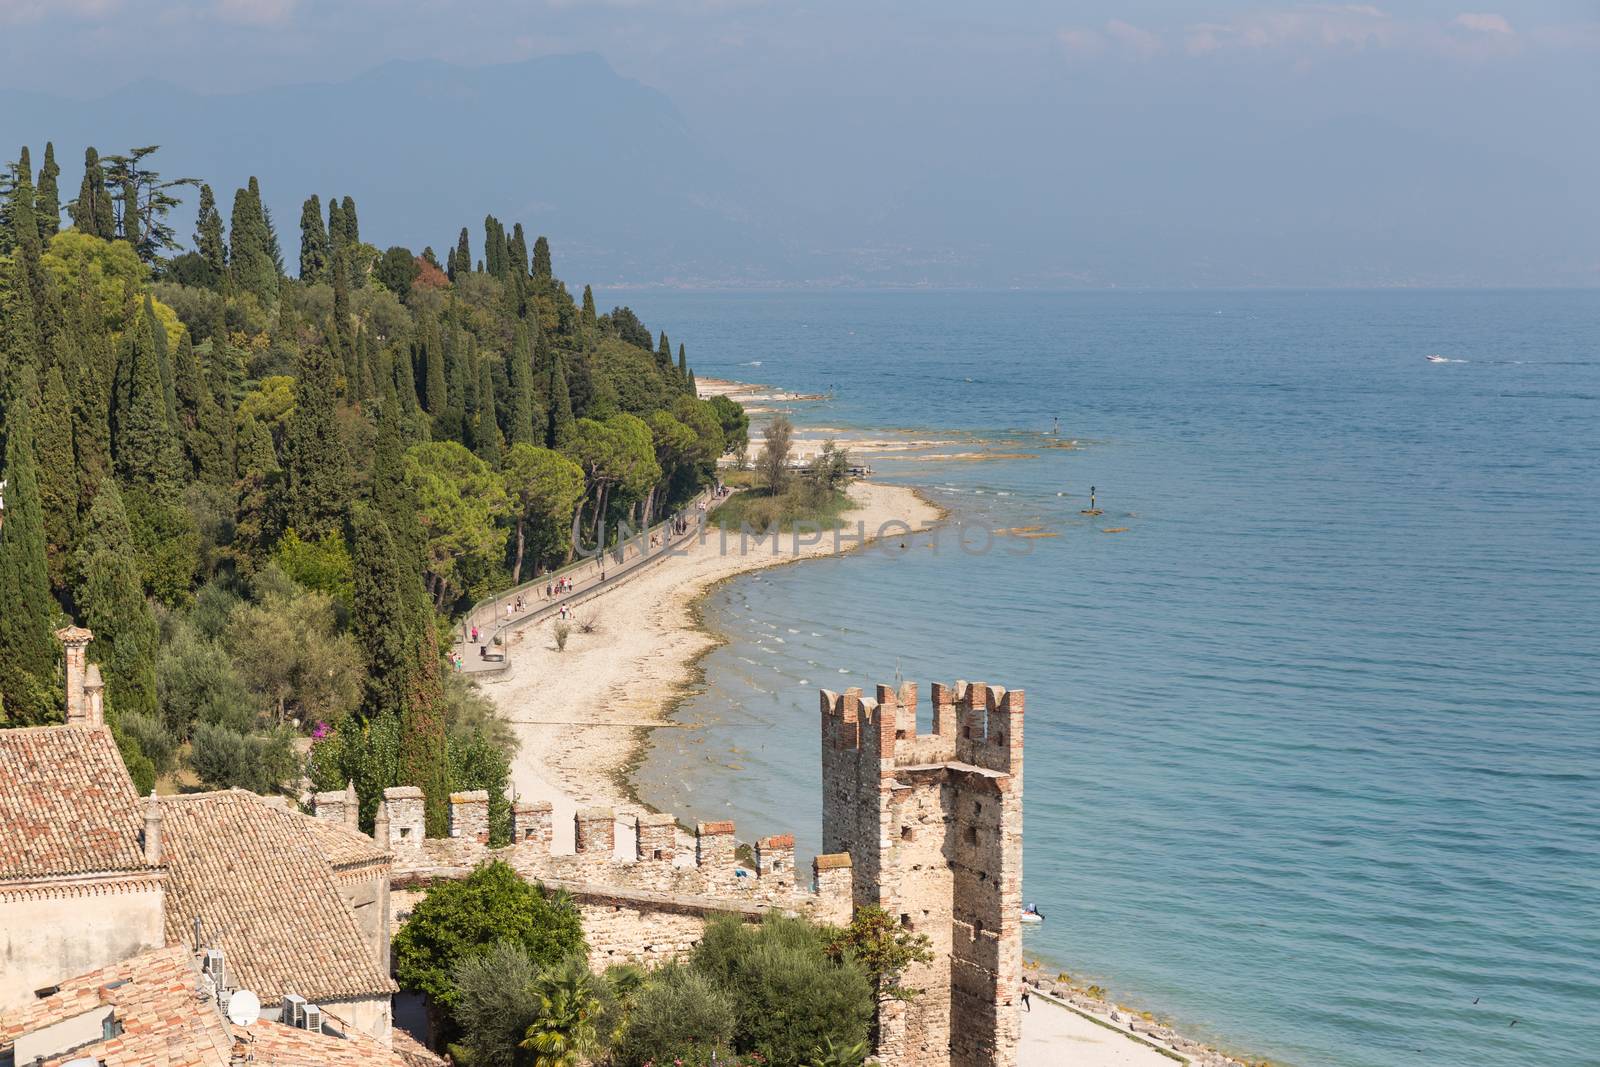 The fortress walls of Castello Scaligero in Sirmione on Lake Garda in Italy